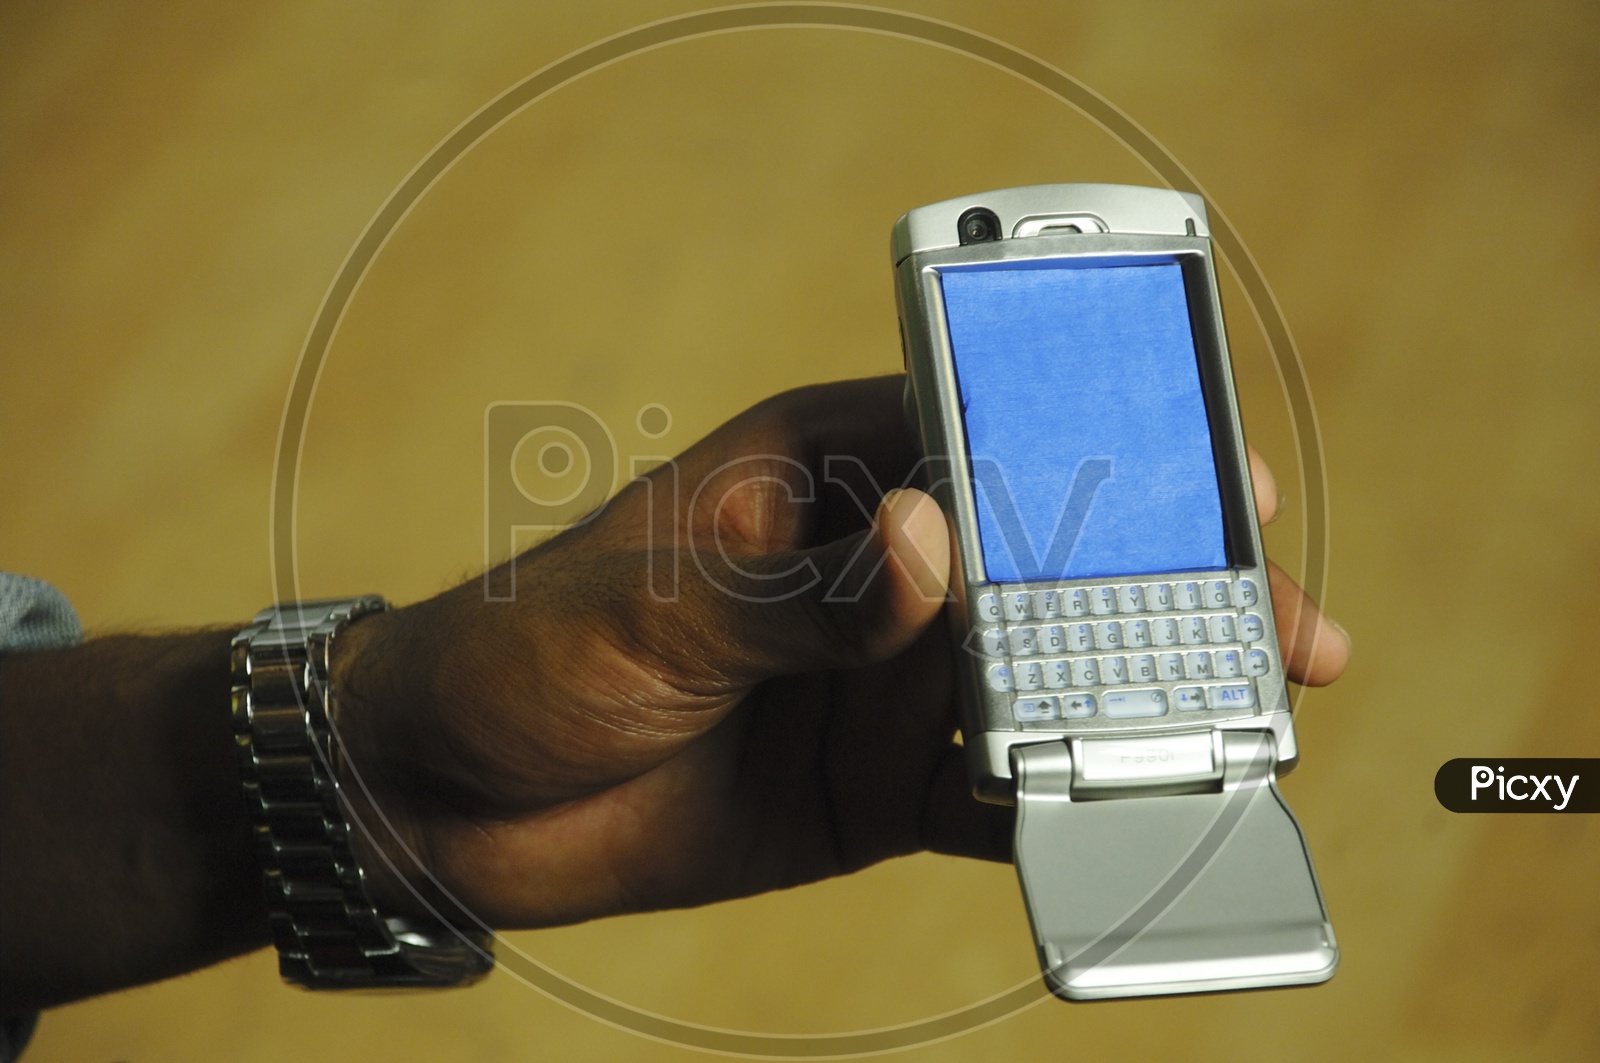 Man holding a mobile phone in his hand